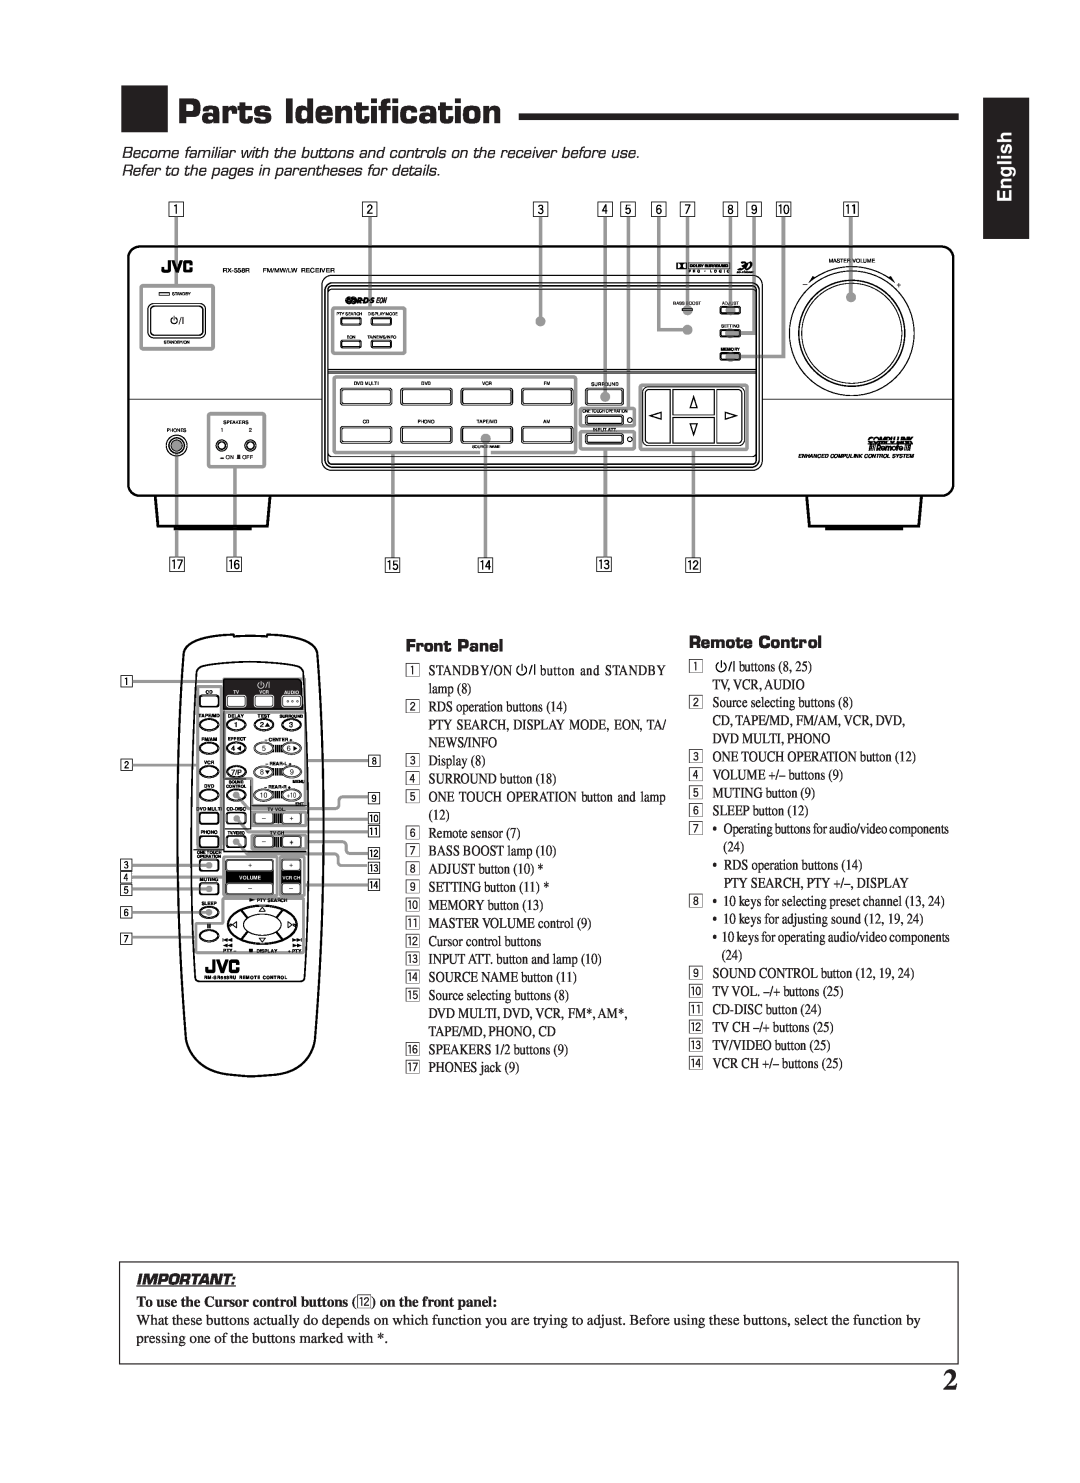 JVC RX-558RBK manual Parts Identification, English, Front Panel, Remote Control 